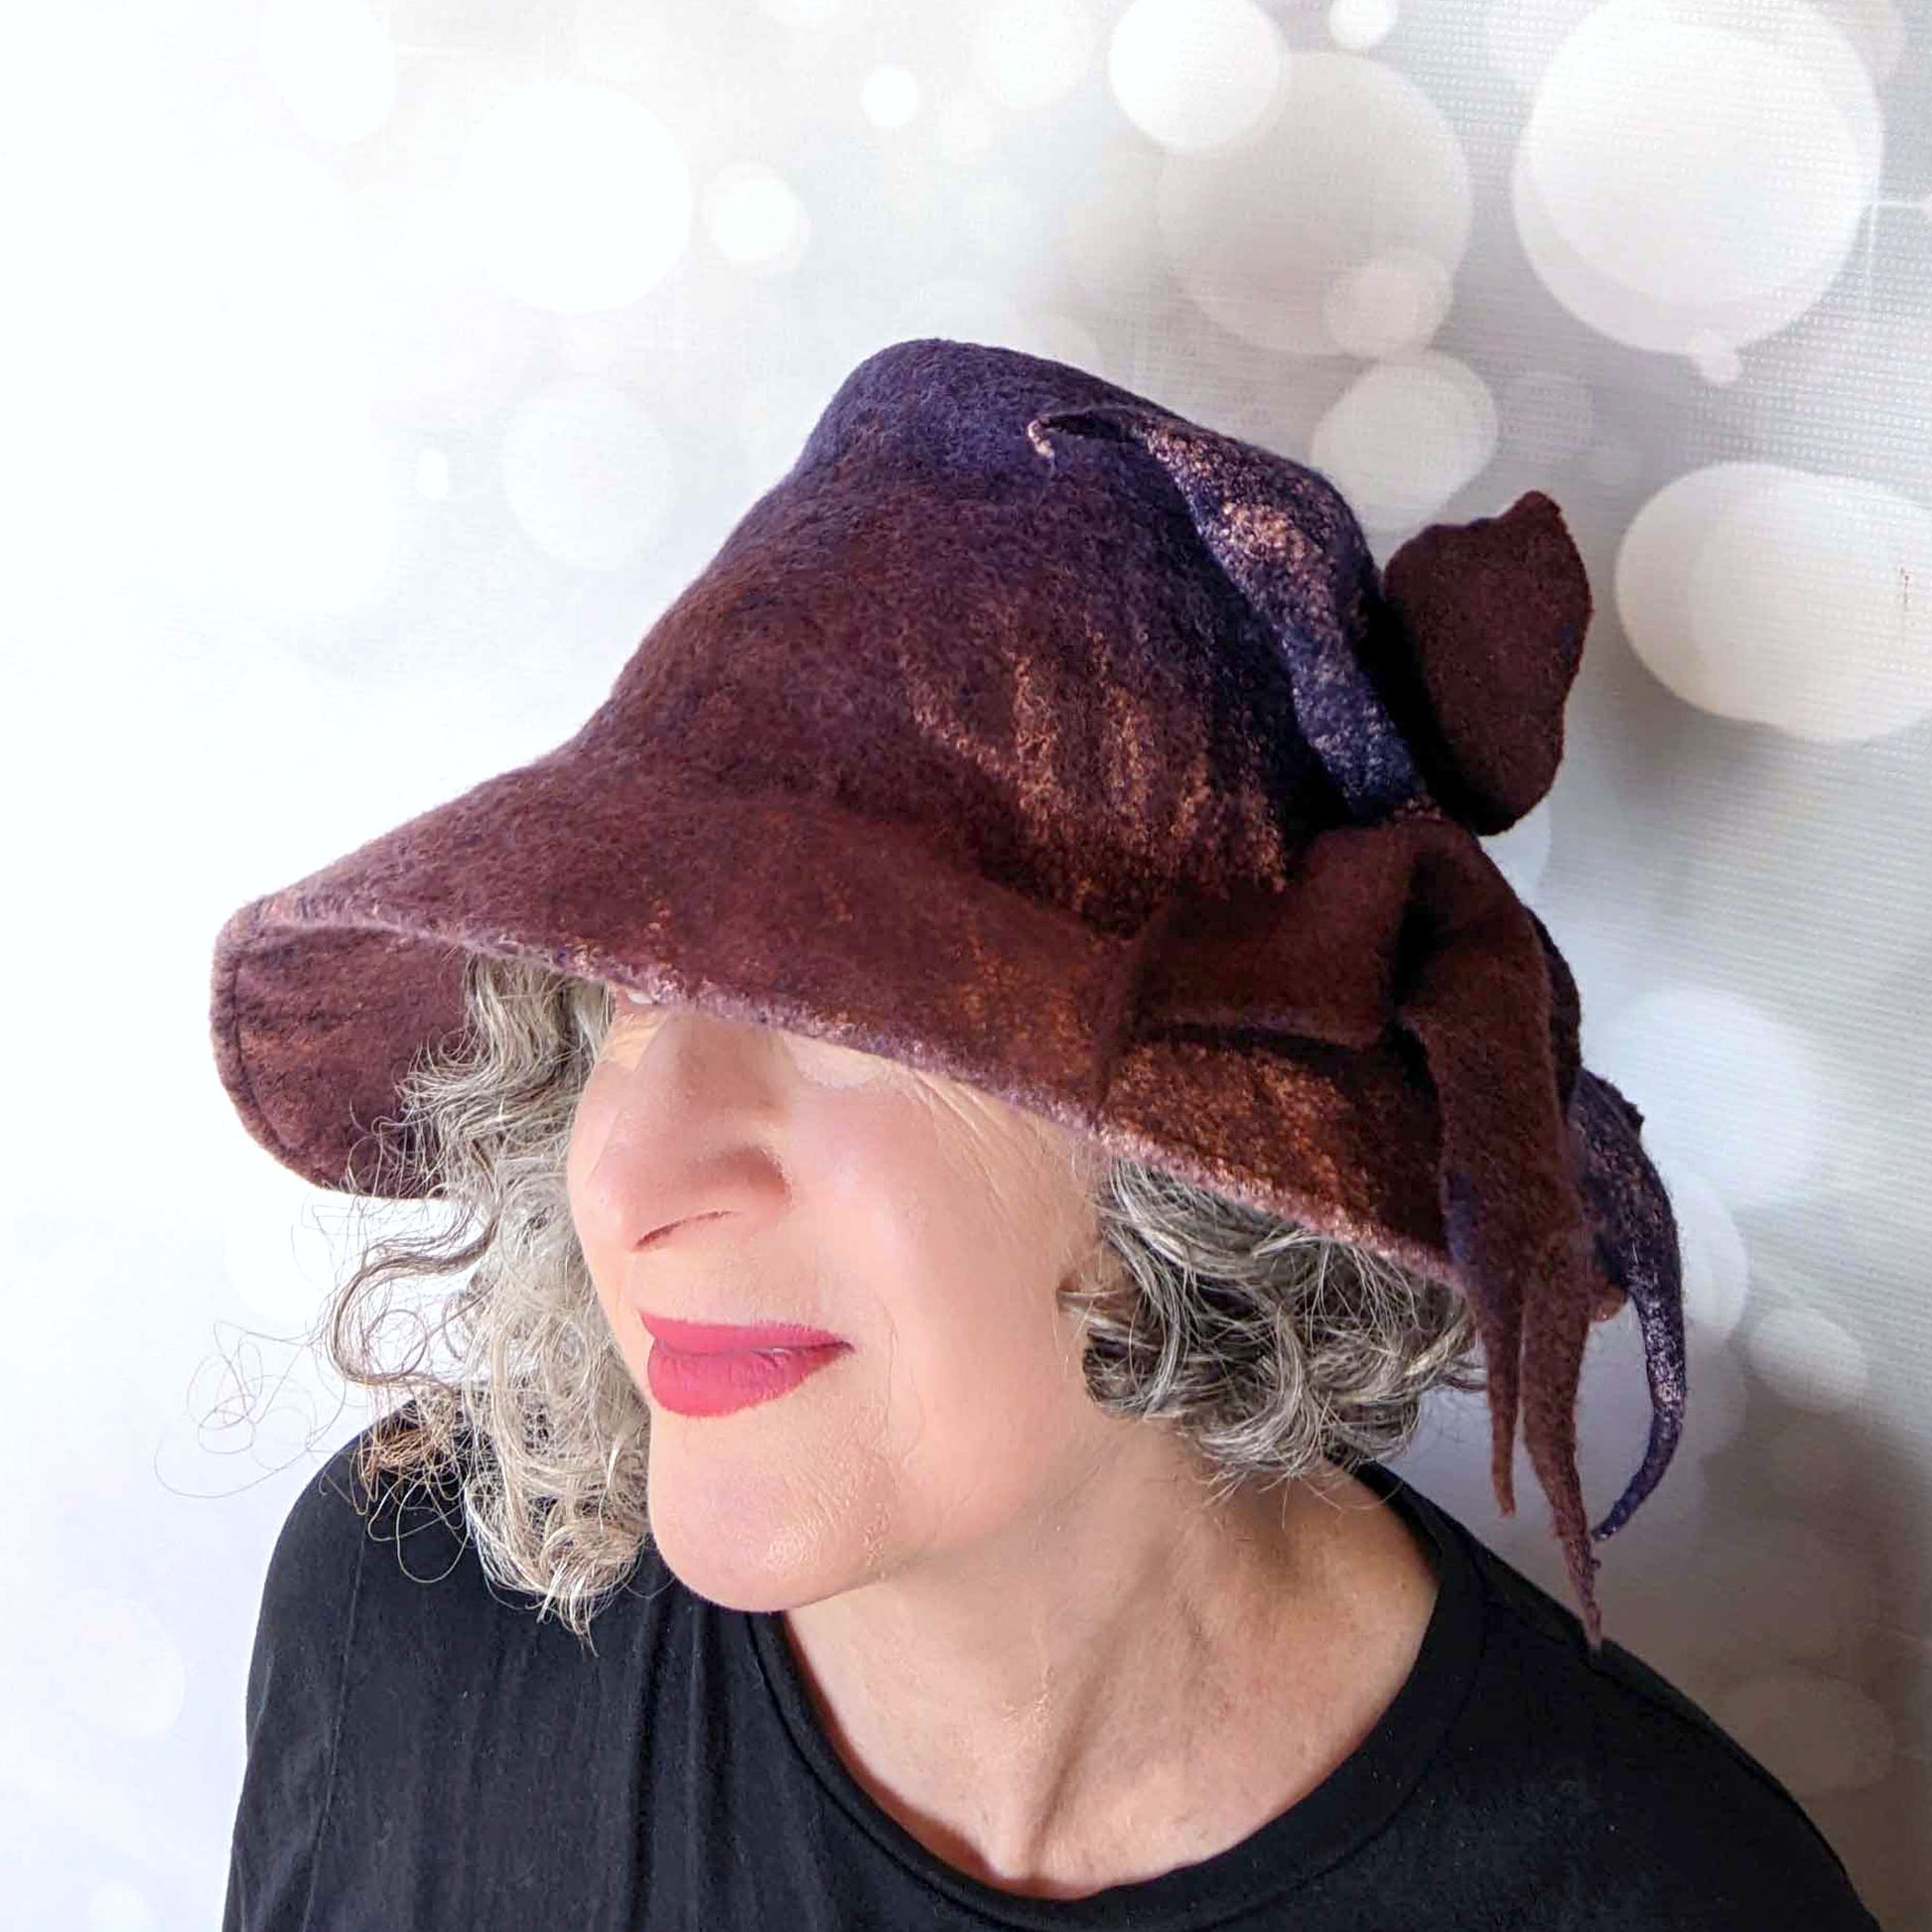 Asymmetrical Brimmed Felt Hat in an Ombre of Navy Brown - threequartersview